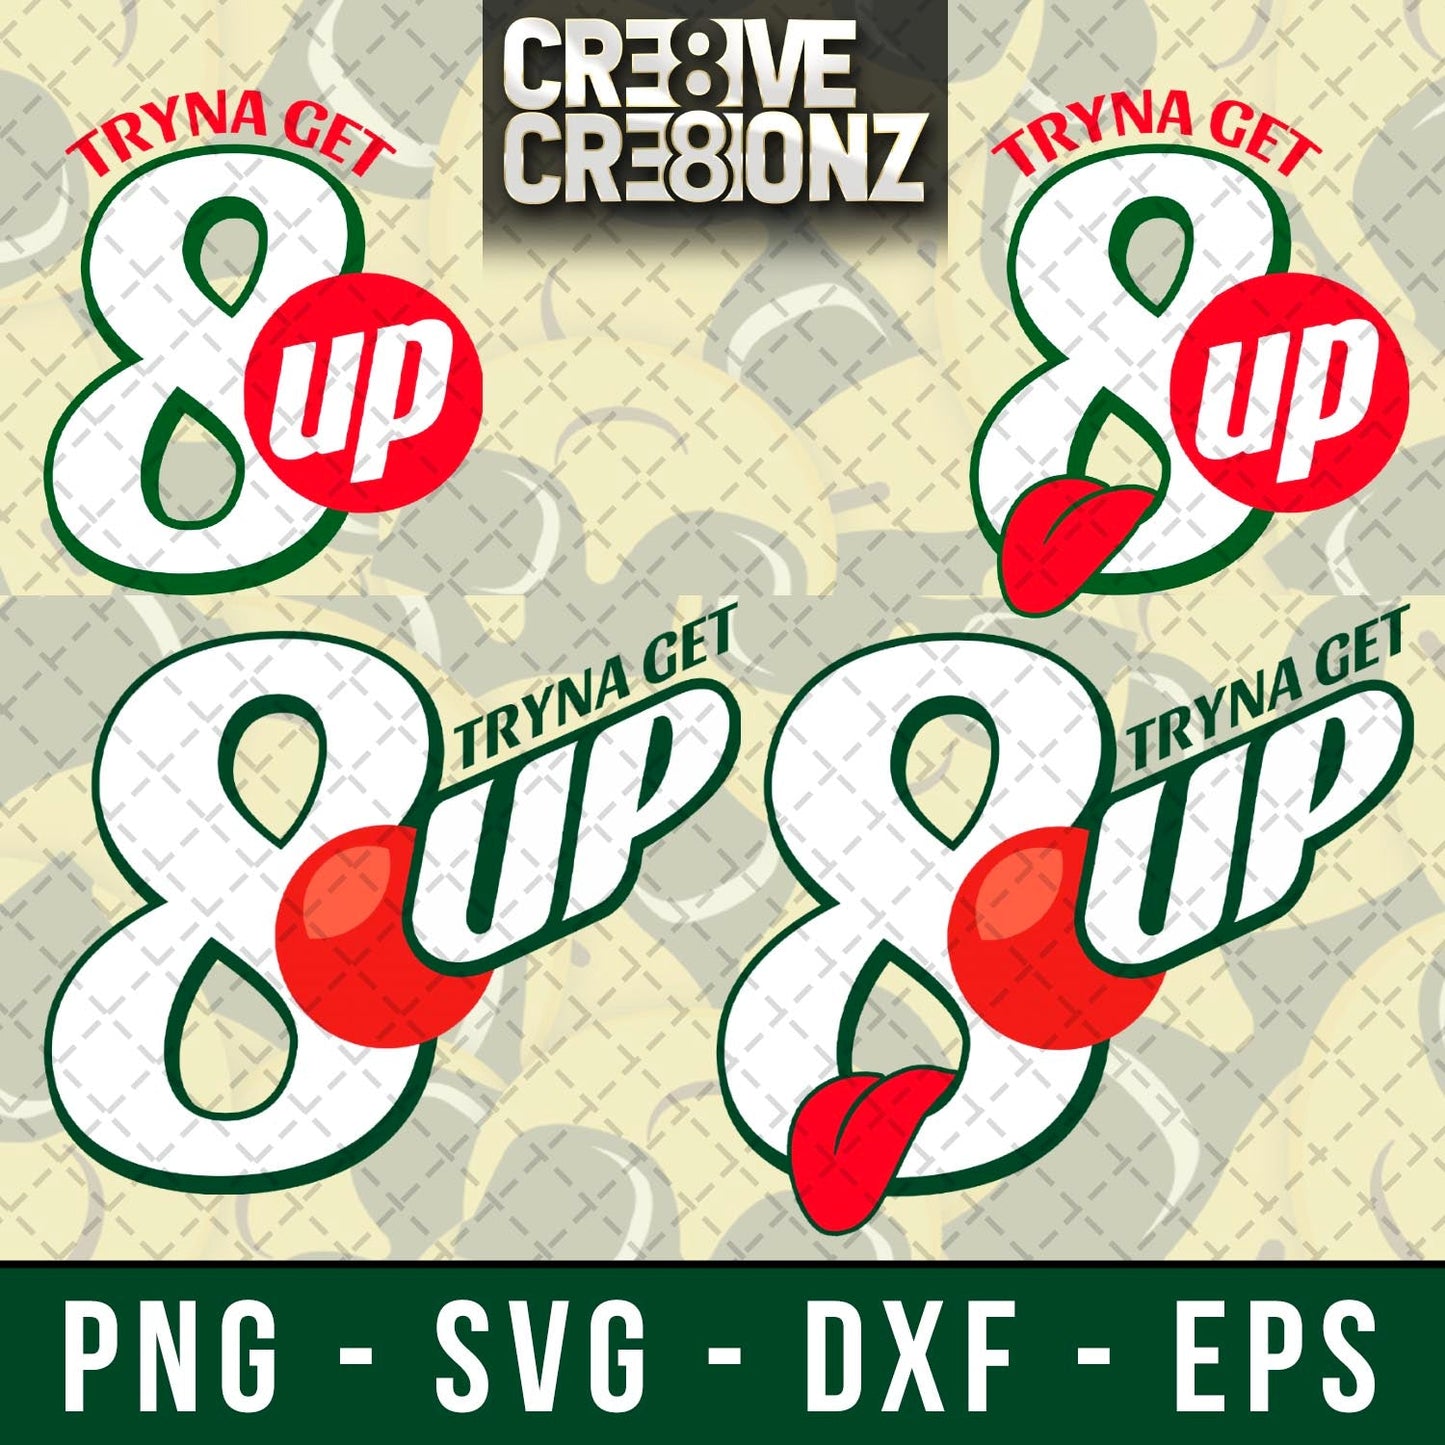 Parody 8up SVG - Cre8ive Cre8ionz